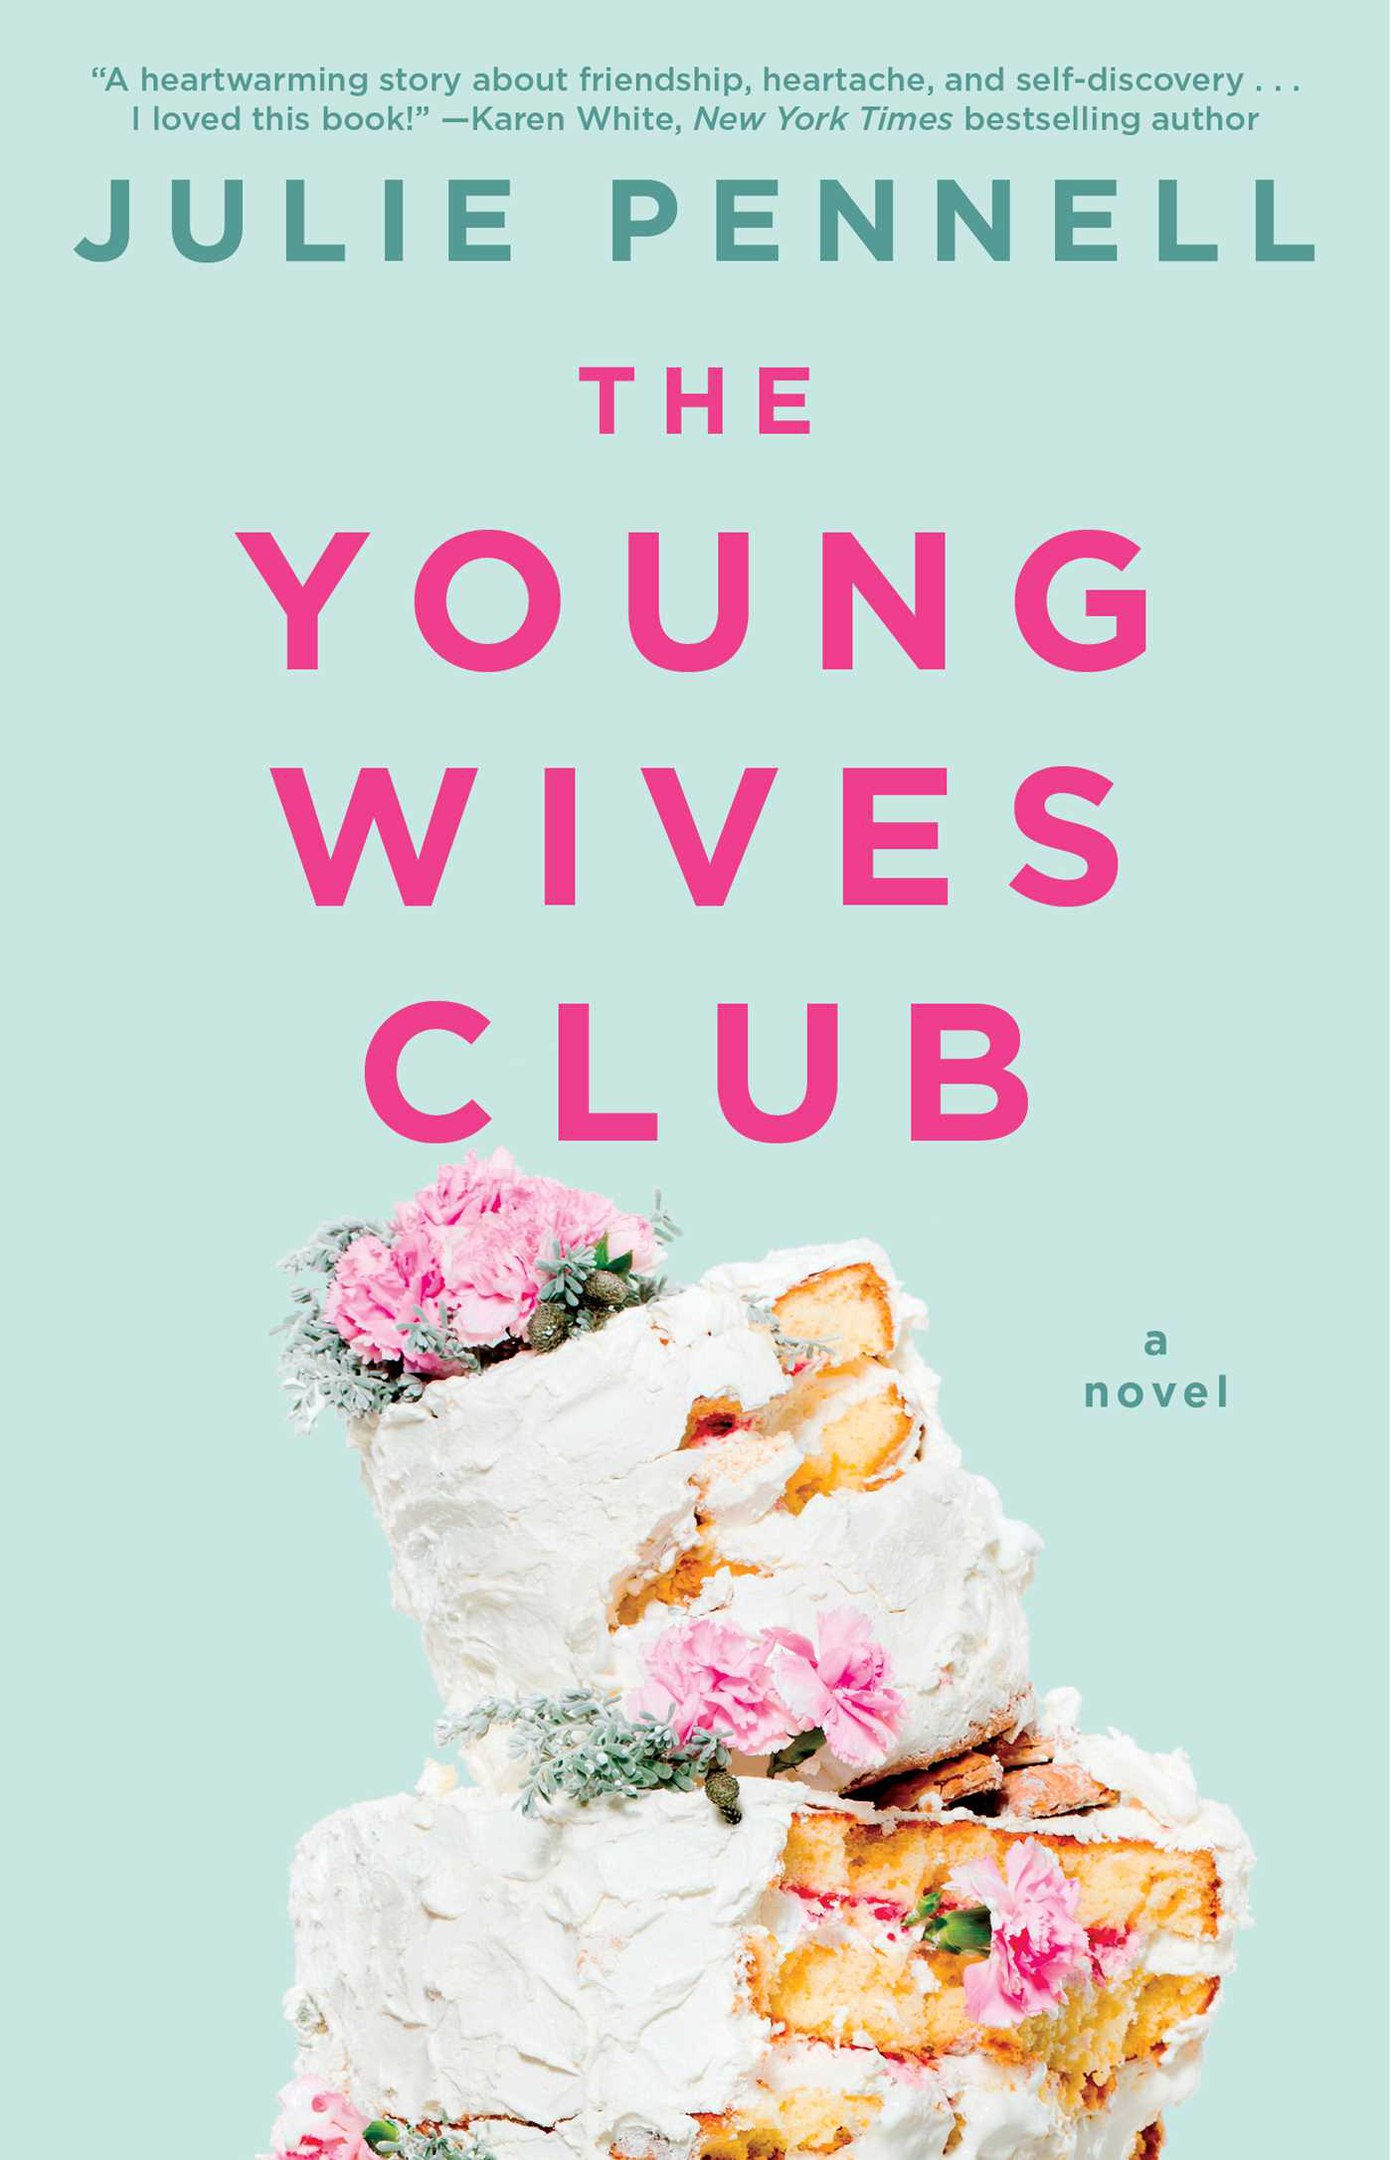 Julie Pennell – The Young Wives Club